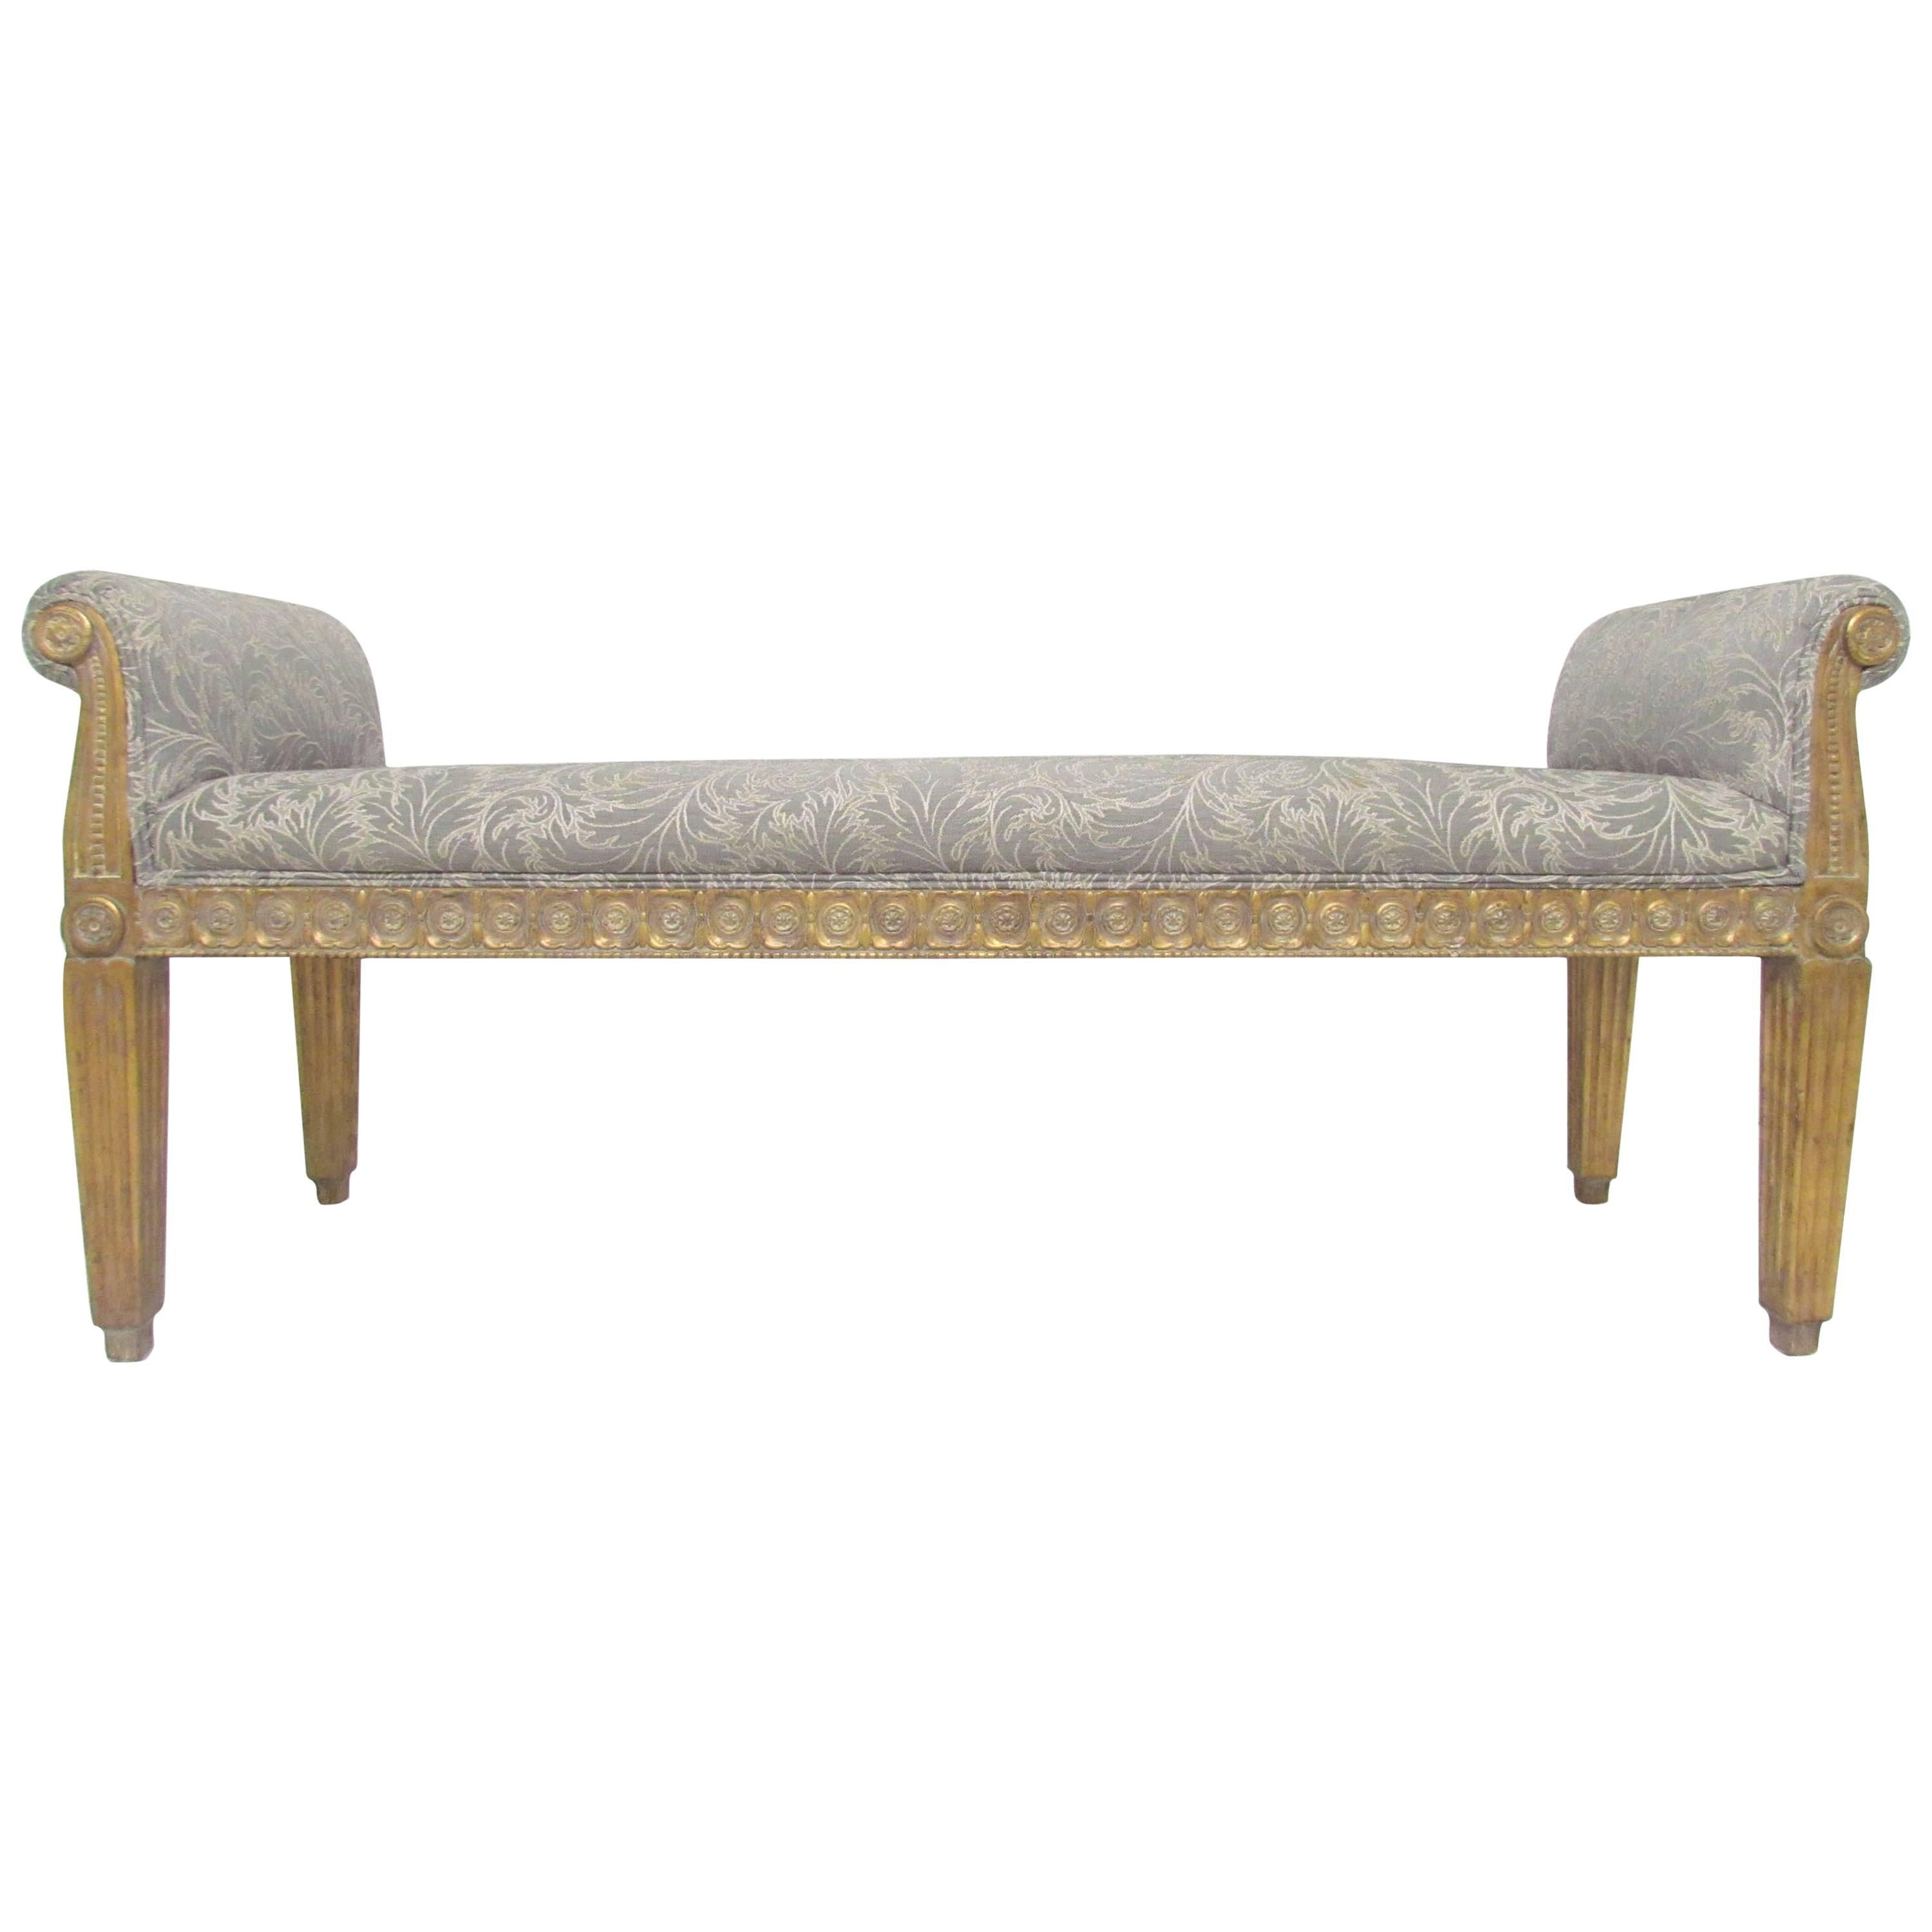 Neoclassical Style Bench Carved Giltwood Frame by Meyer Gunther Martini